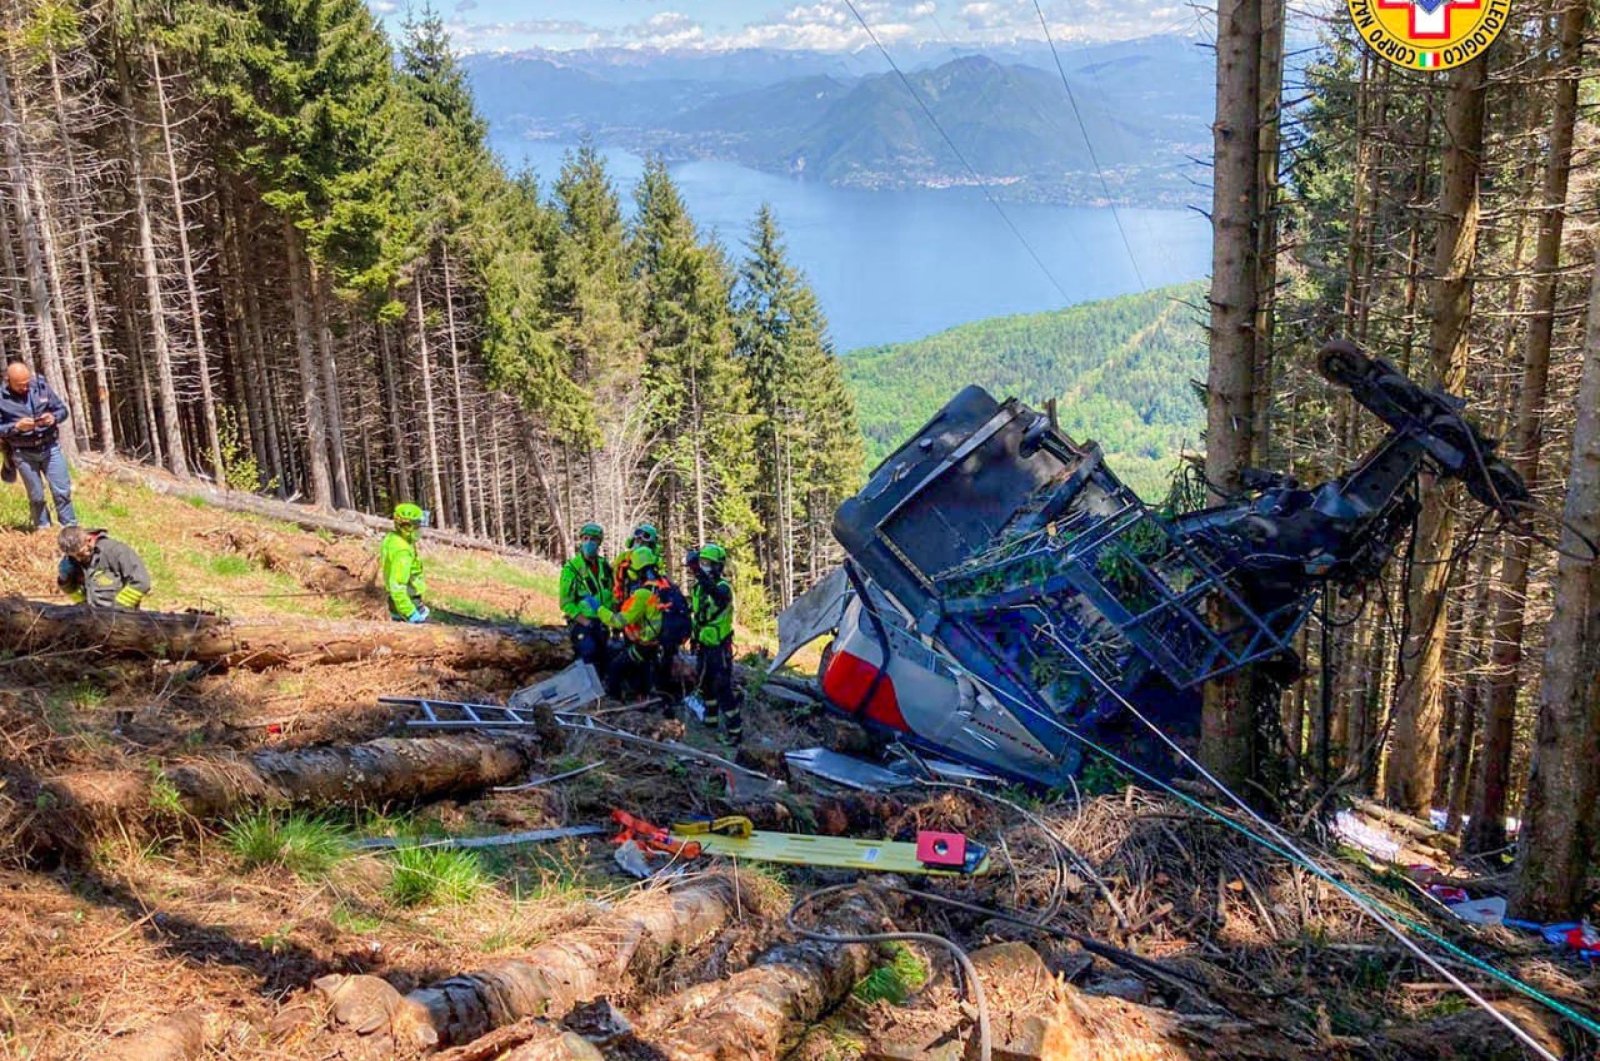 A handout photo made available by the press office of the Corpo Nazionale Soccorso Alpino Speleologico (CNSAS), Italy's national mountain rescue service, shows the scene of a cable car accident near Lake Maggiore, in Verbania, northern Italy, May 23, 2021. (EPA Photo)